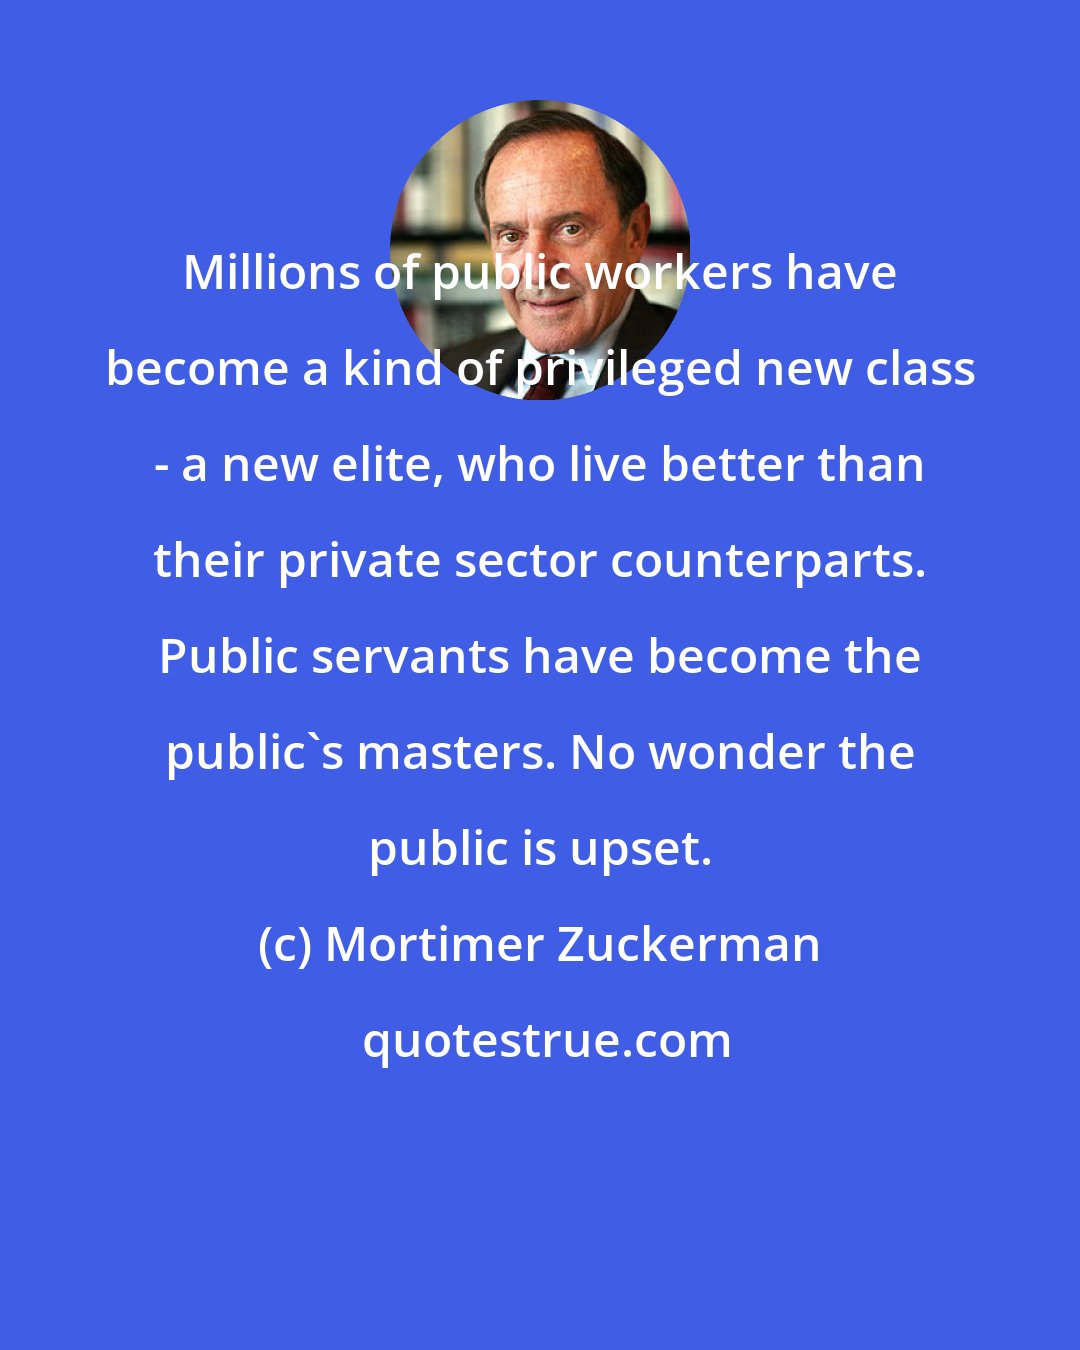 Mortimer Zuckerman: Millions of public workers have become a kind of privileged new class - a new elite, who live better than their private sector counterparts. Public servants have become the public's masters. No wonder the public is upset.